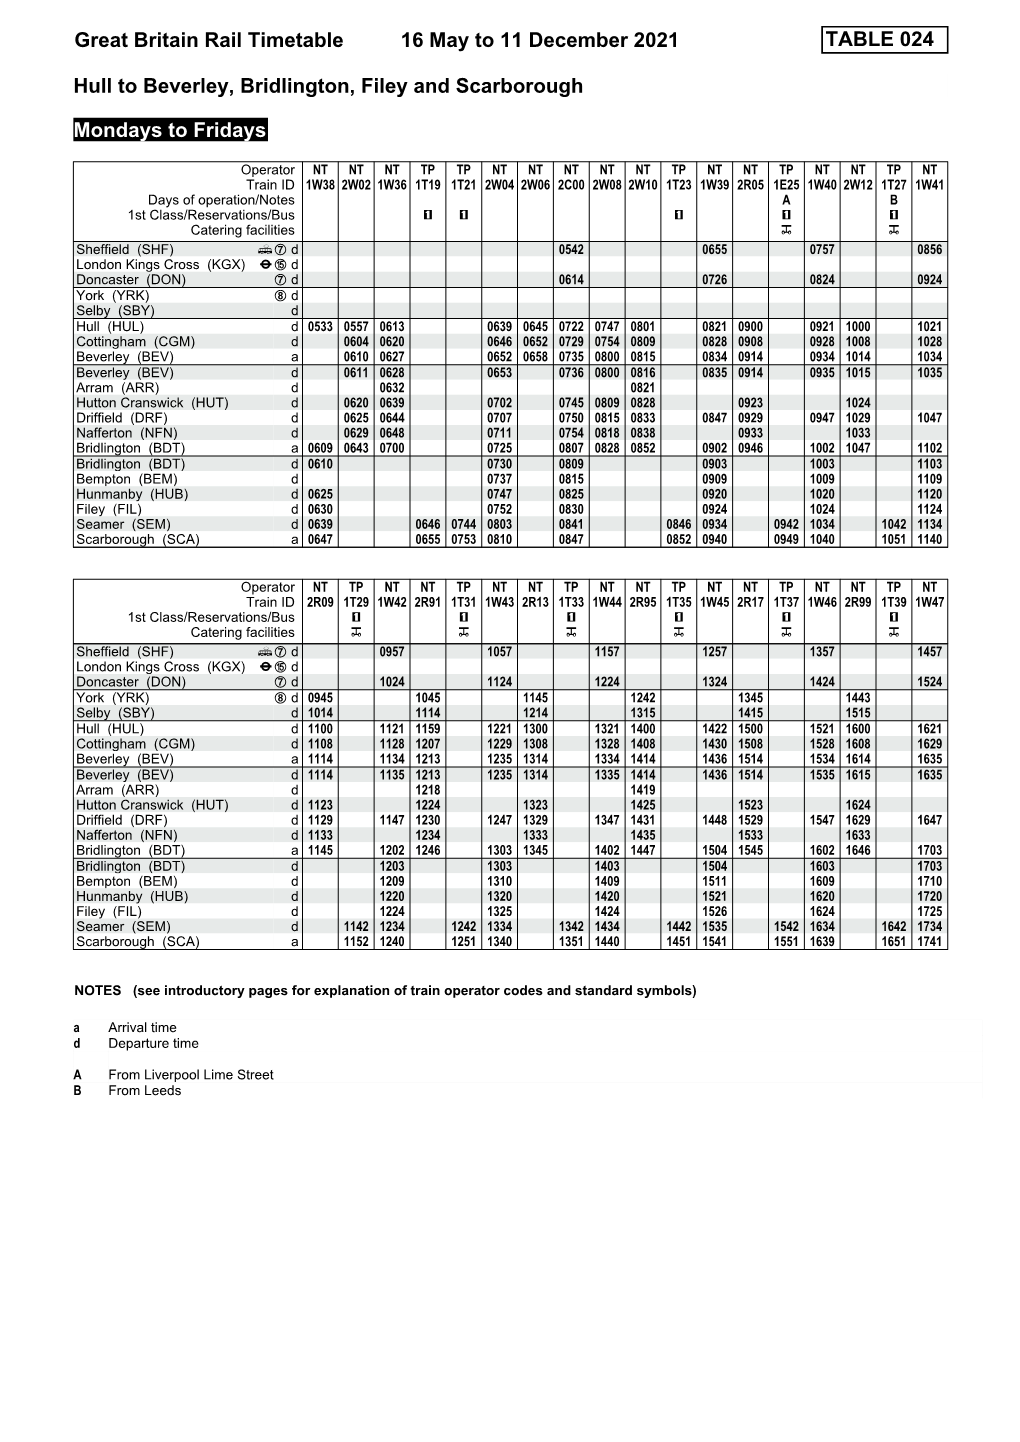 Great Britain Rail Timetable 16 May to 11 December 2021 TABLE 02